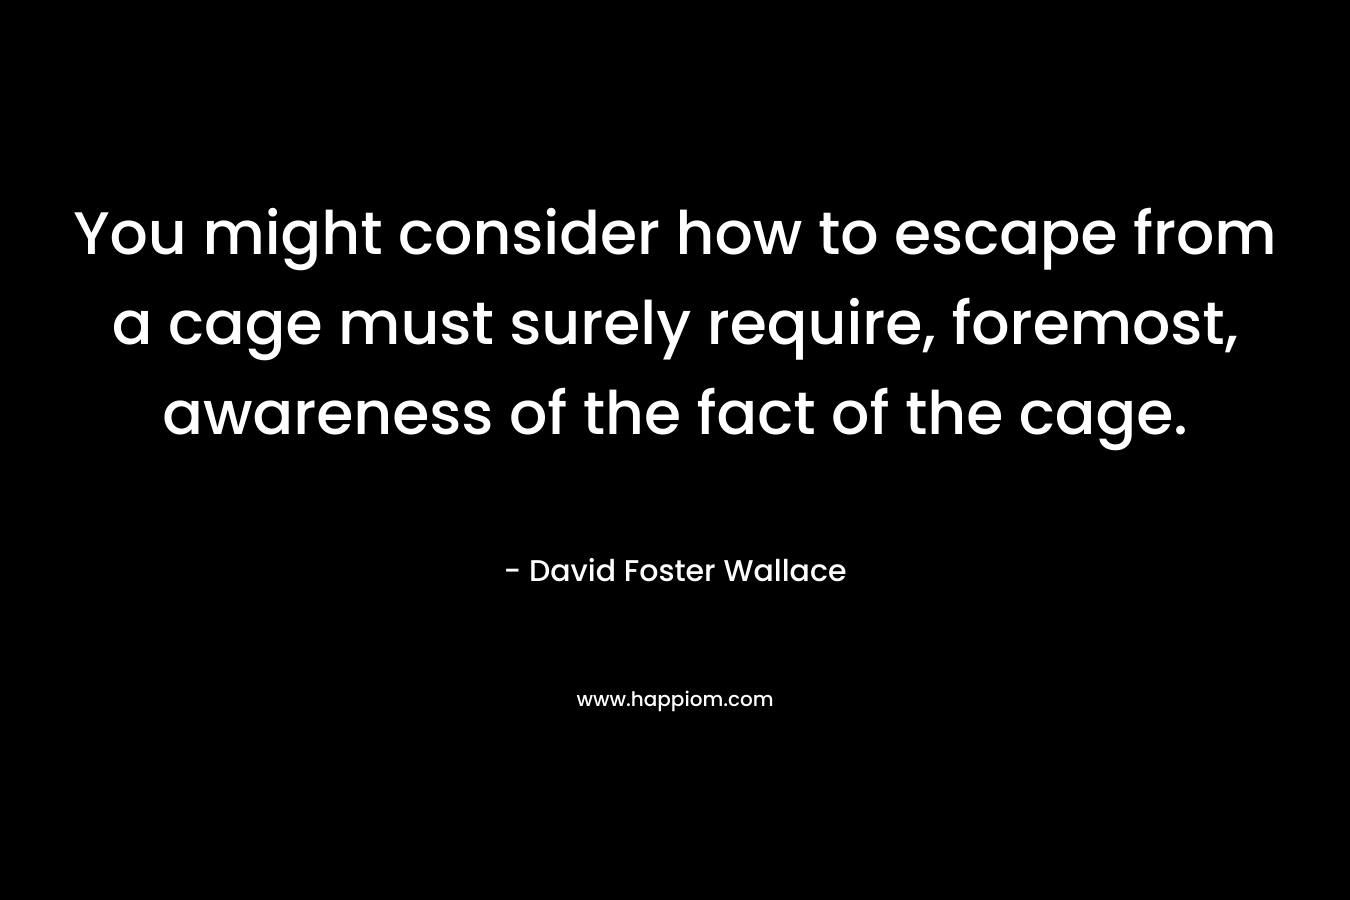 You might consider how to escape from a cage must surely require, foremost, awareness of the fact of the cage. – David Foster Wallace